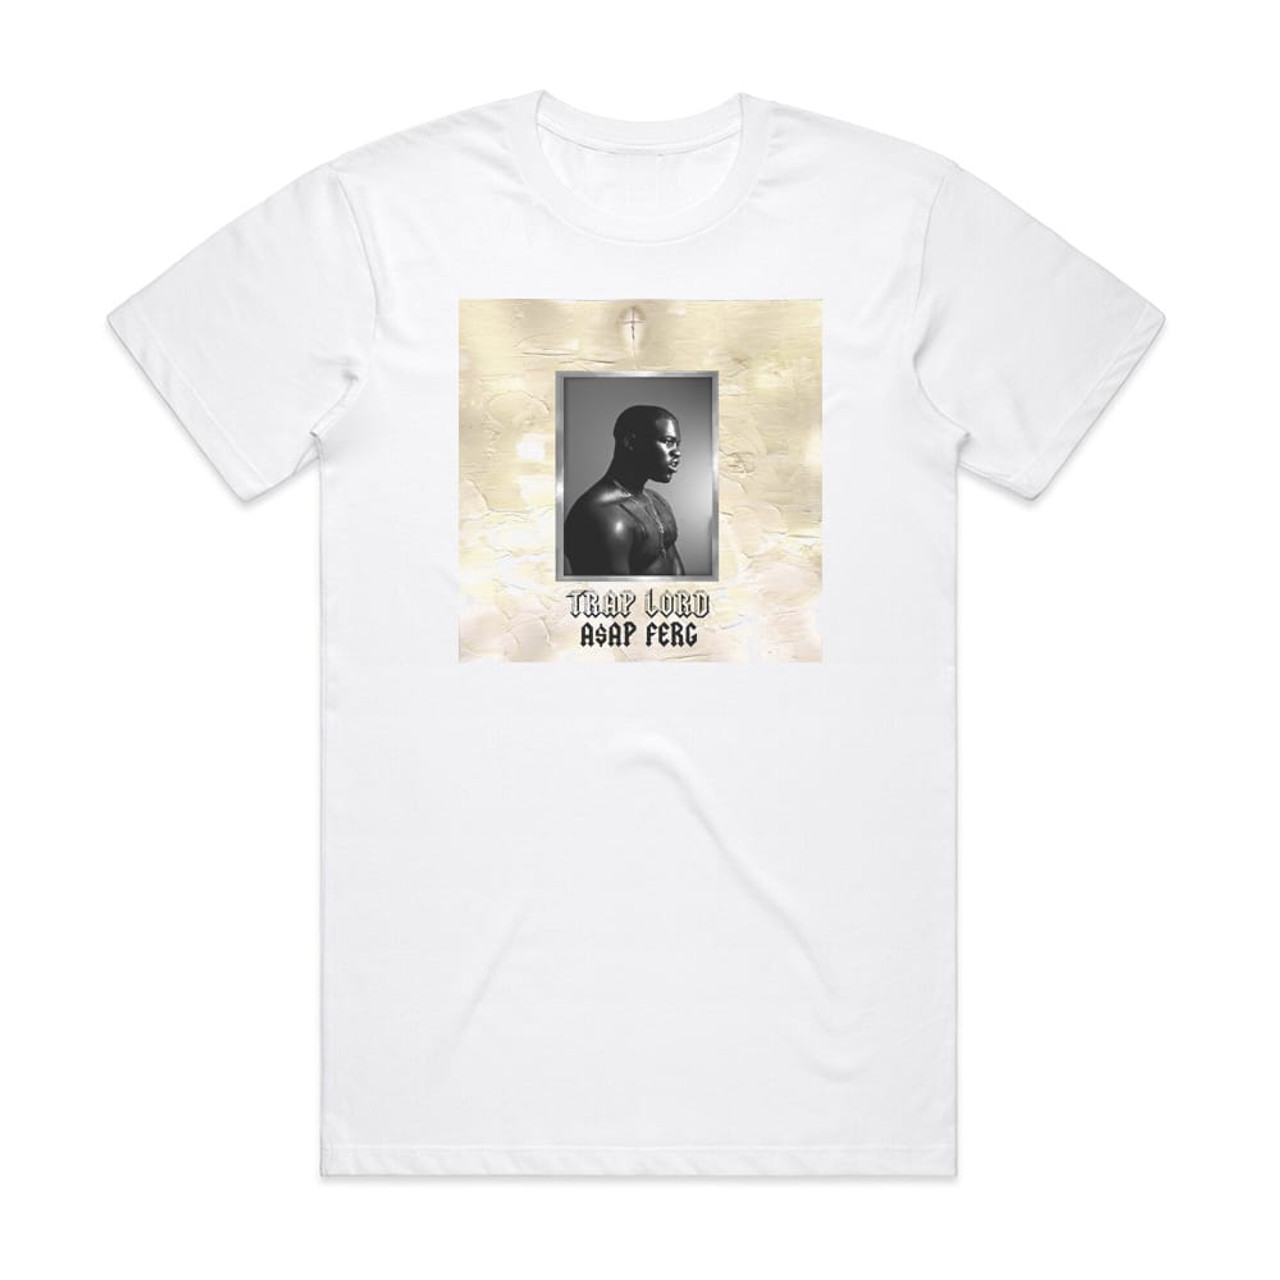 Udlevering Rendition voldsom ASAP Ferg Trap Lord Album Cover T-Shirt White